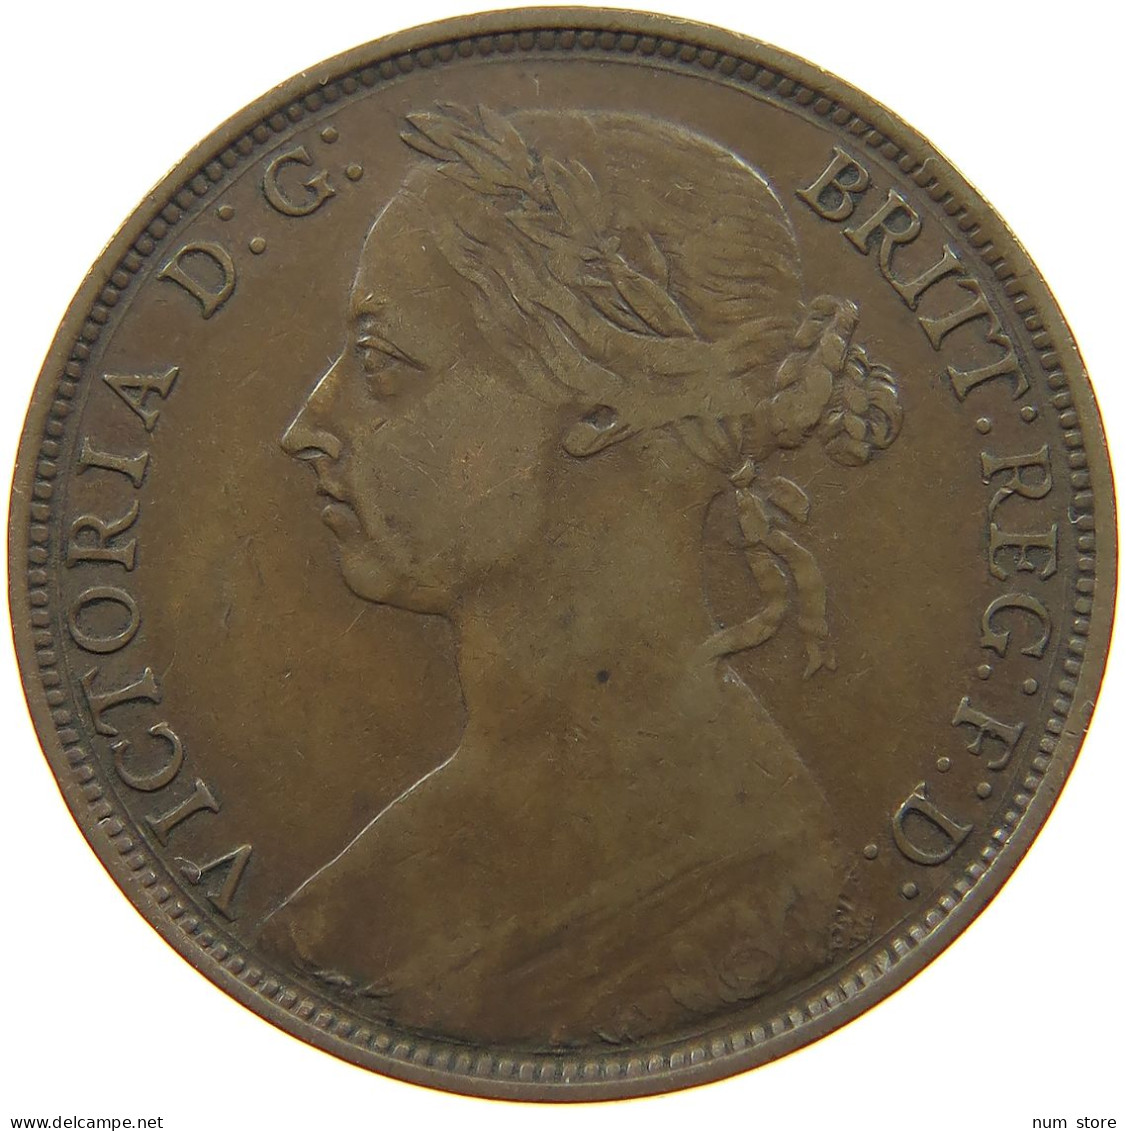 GREAT BRITAIN PENNY 1889 Victoria 1837-1901 #t100 0349 - D. 1 Penny